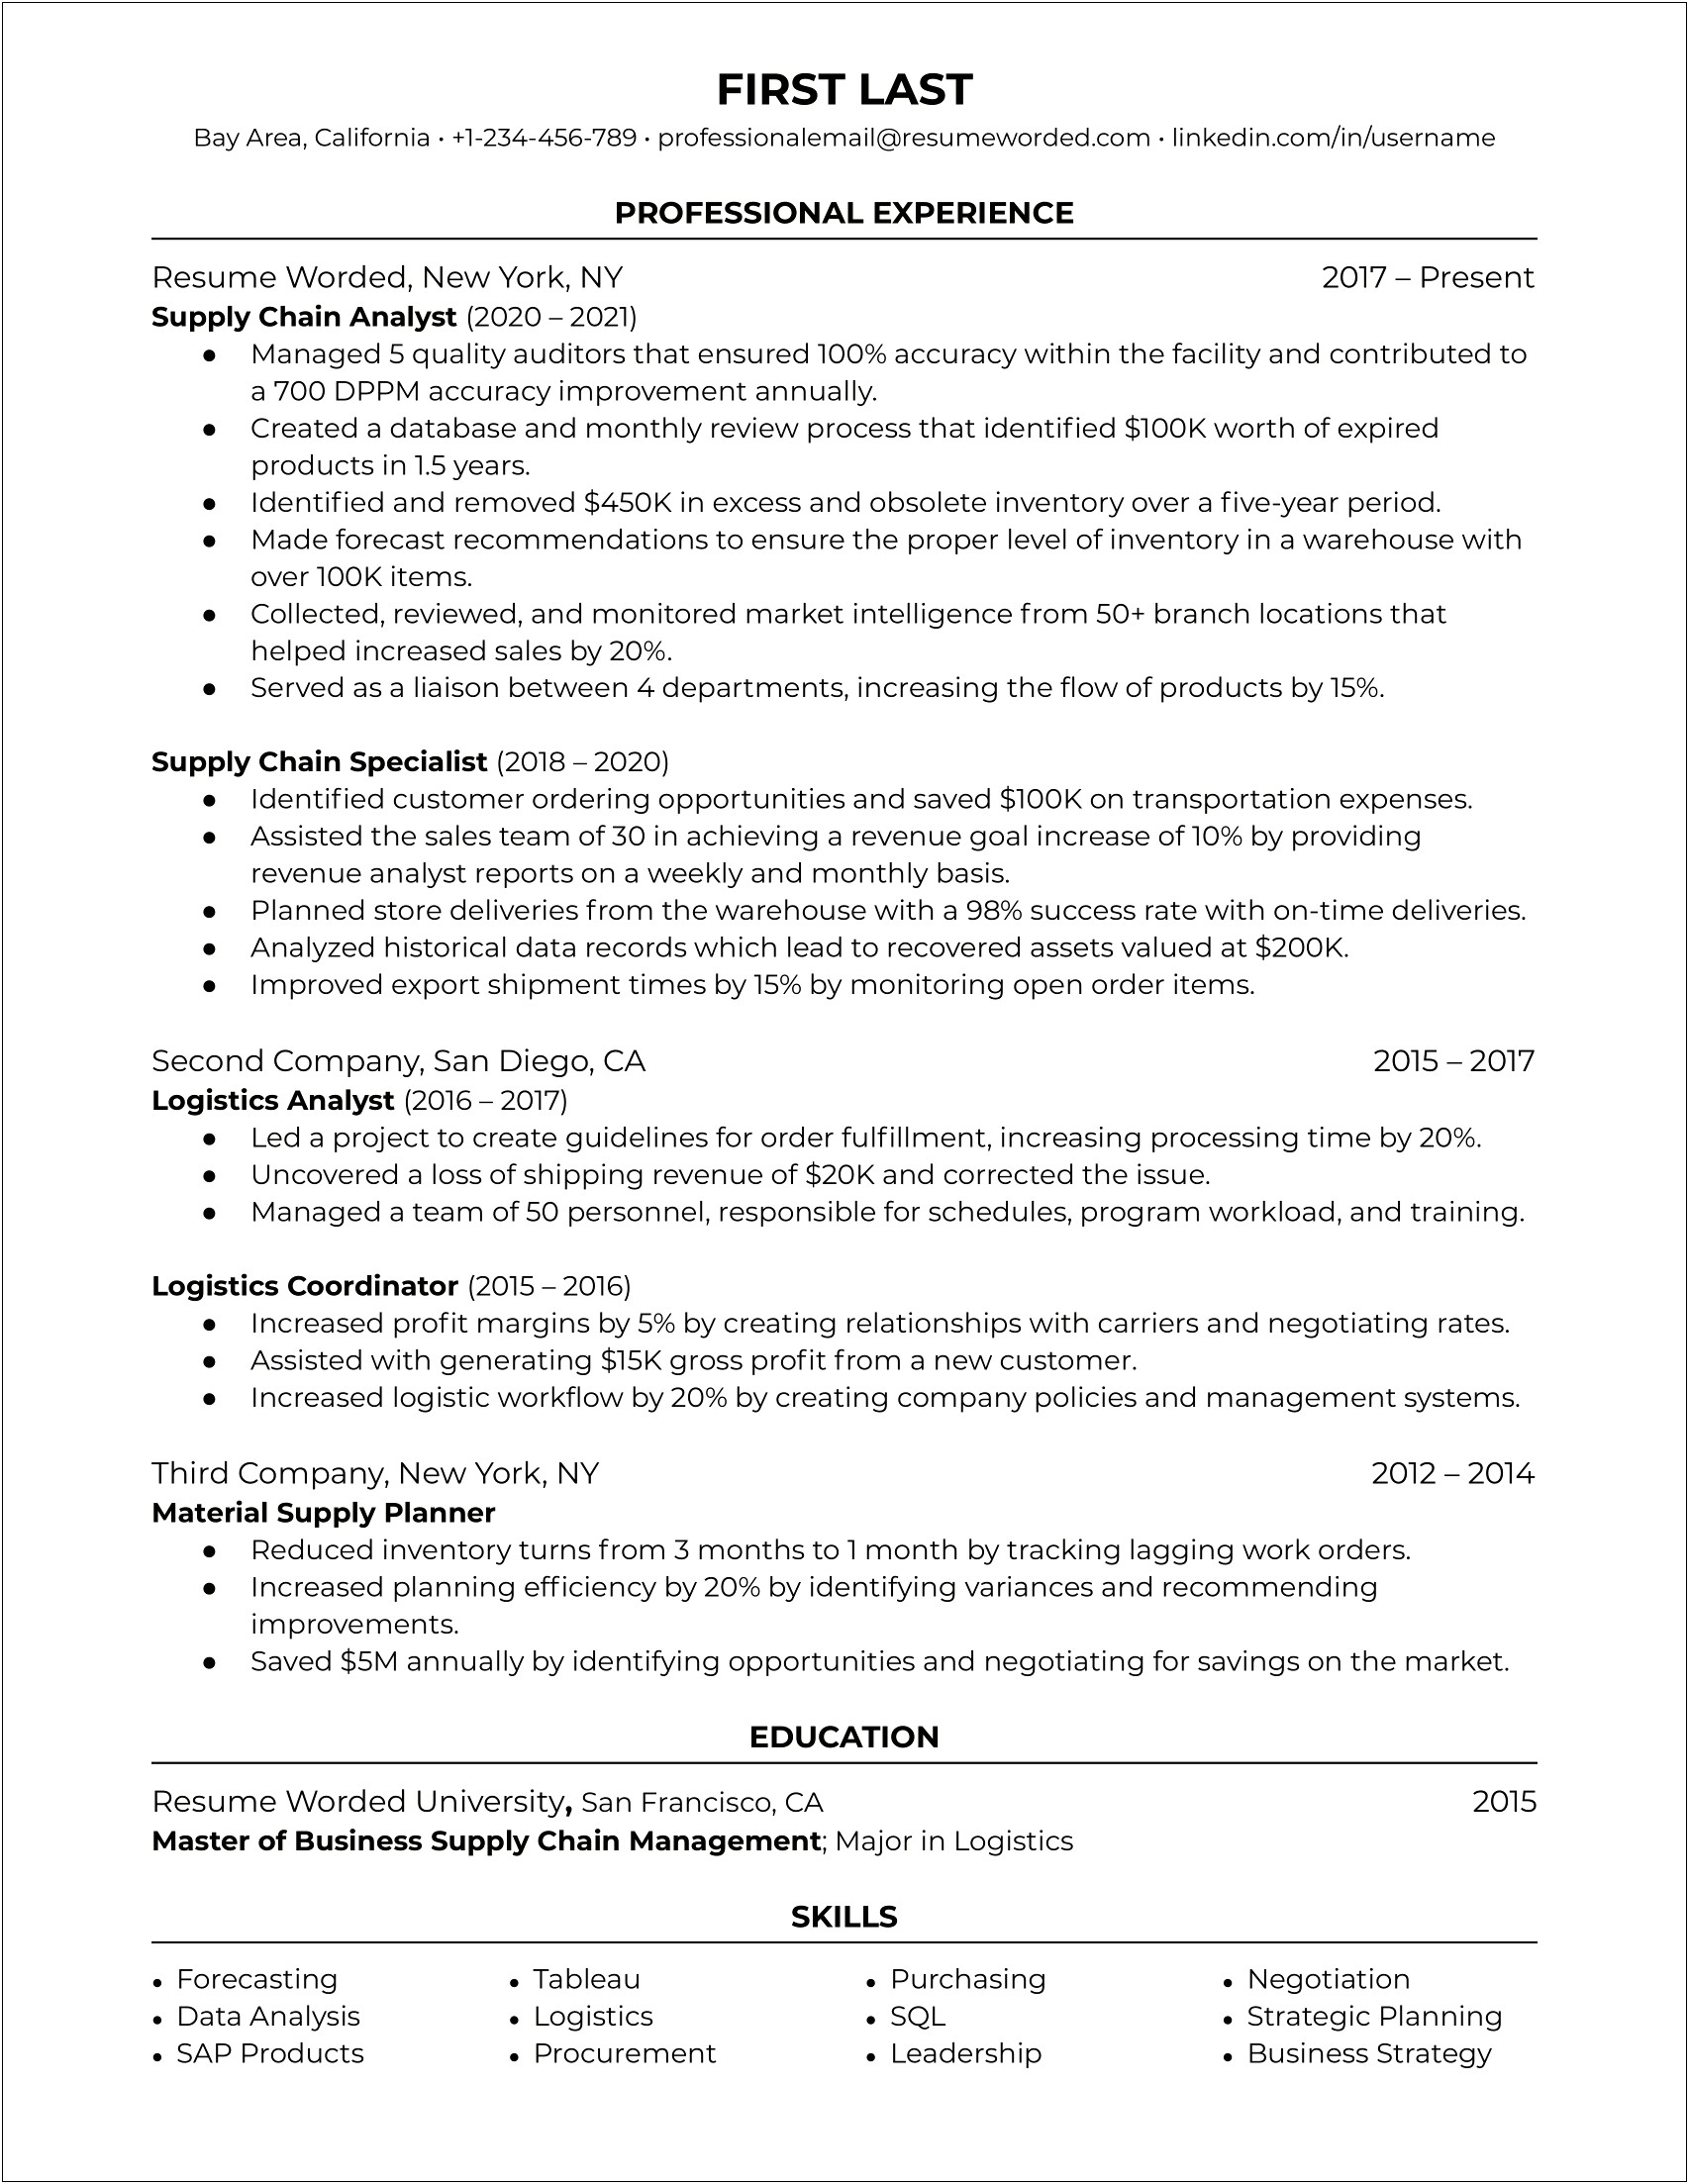 Sample Resume Of Supply Chain Management